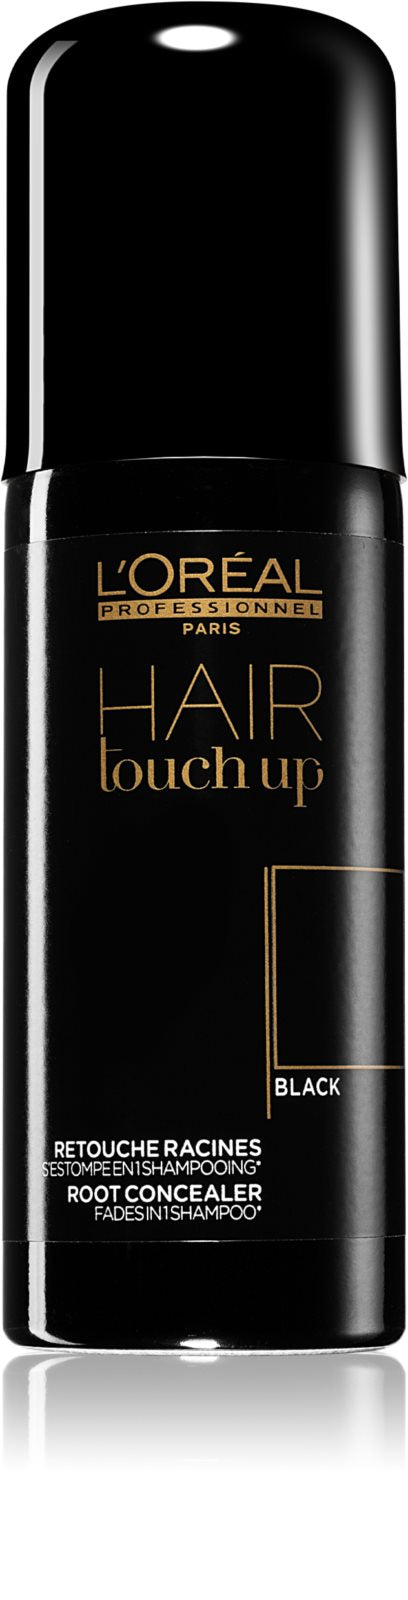 L’OREAL PROFESSIONNEL HAIR TOUCH UP BLACK